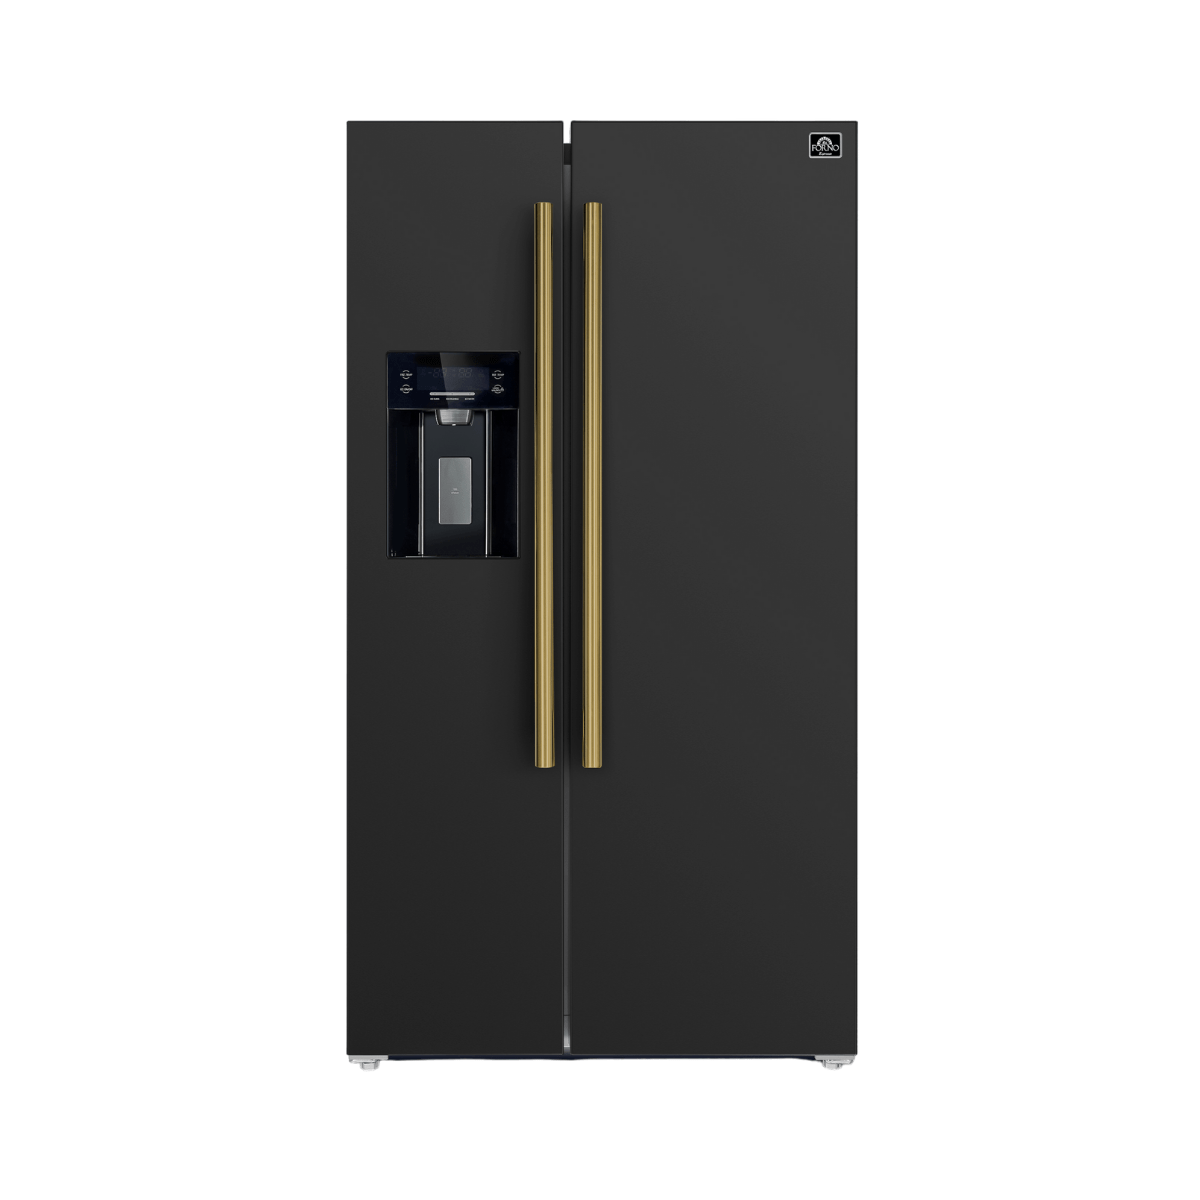 Forno Espresso 36" 20 Cu. Ft. Side-By-Side Refrigerator with Water and Ice Dispenser in Black with Antique Brass Handles Refrigerator FFRBI1844-36BLK Luxury Appliances Direct